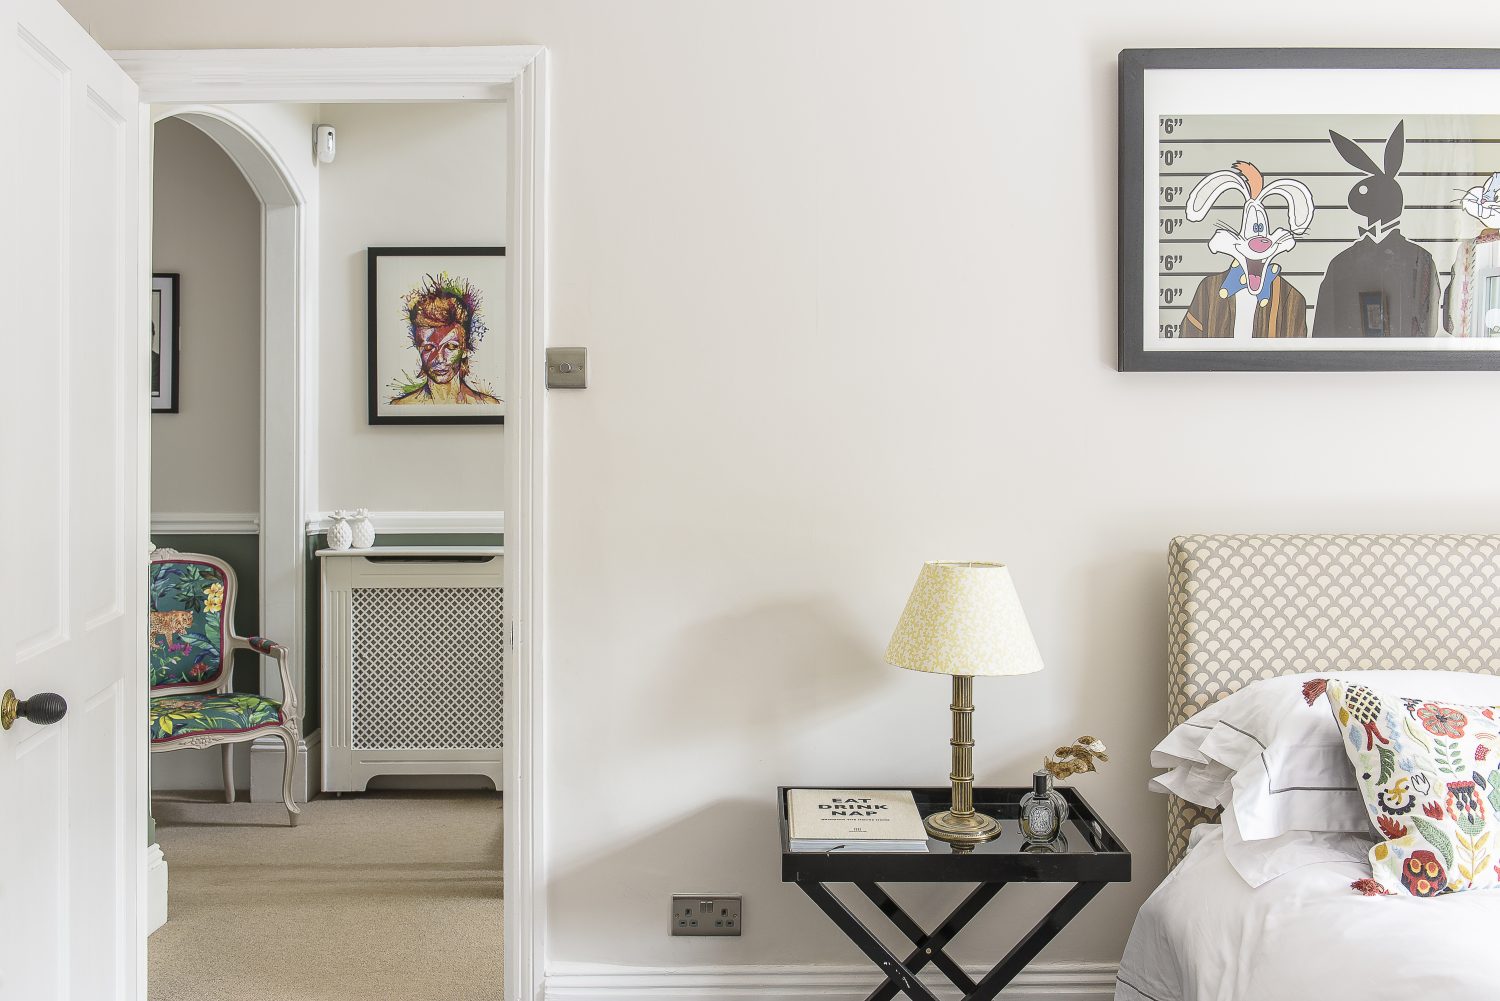 The guest bedroom is a calm haven, with walls painted in Farrow & Ball Strong White and a pleasing mix of fabric designs and colours provided by the upholstered headboard, soft furnishings and lampshades made by Jules – proving that pattern doesn’t always have to match